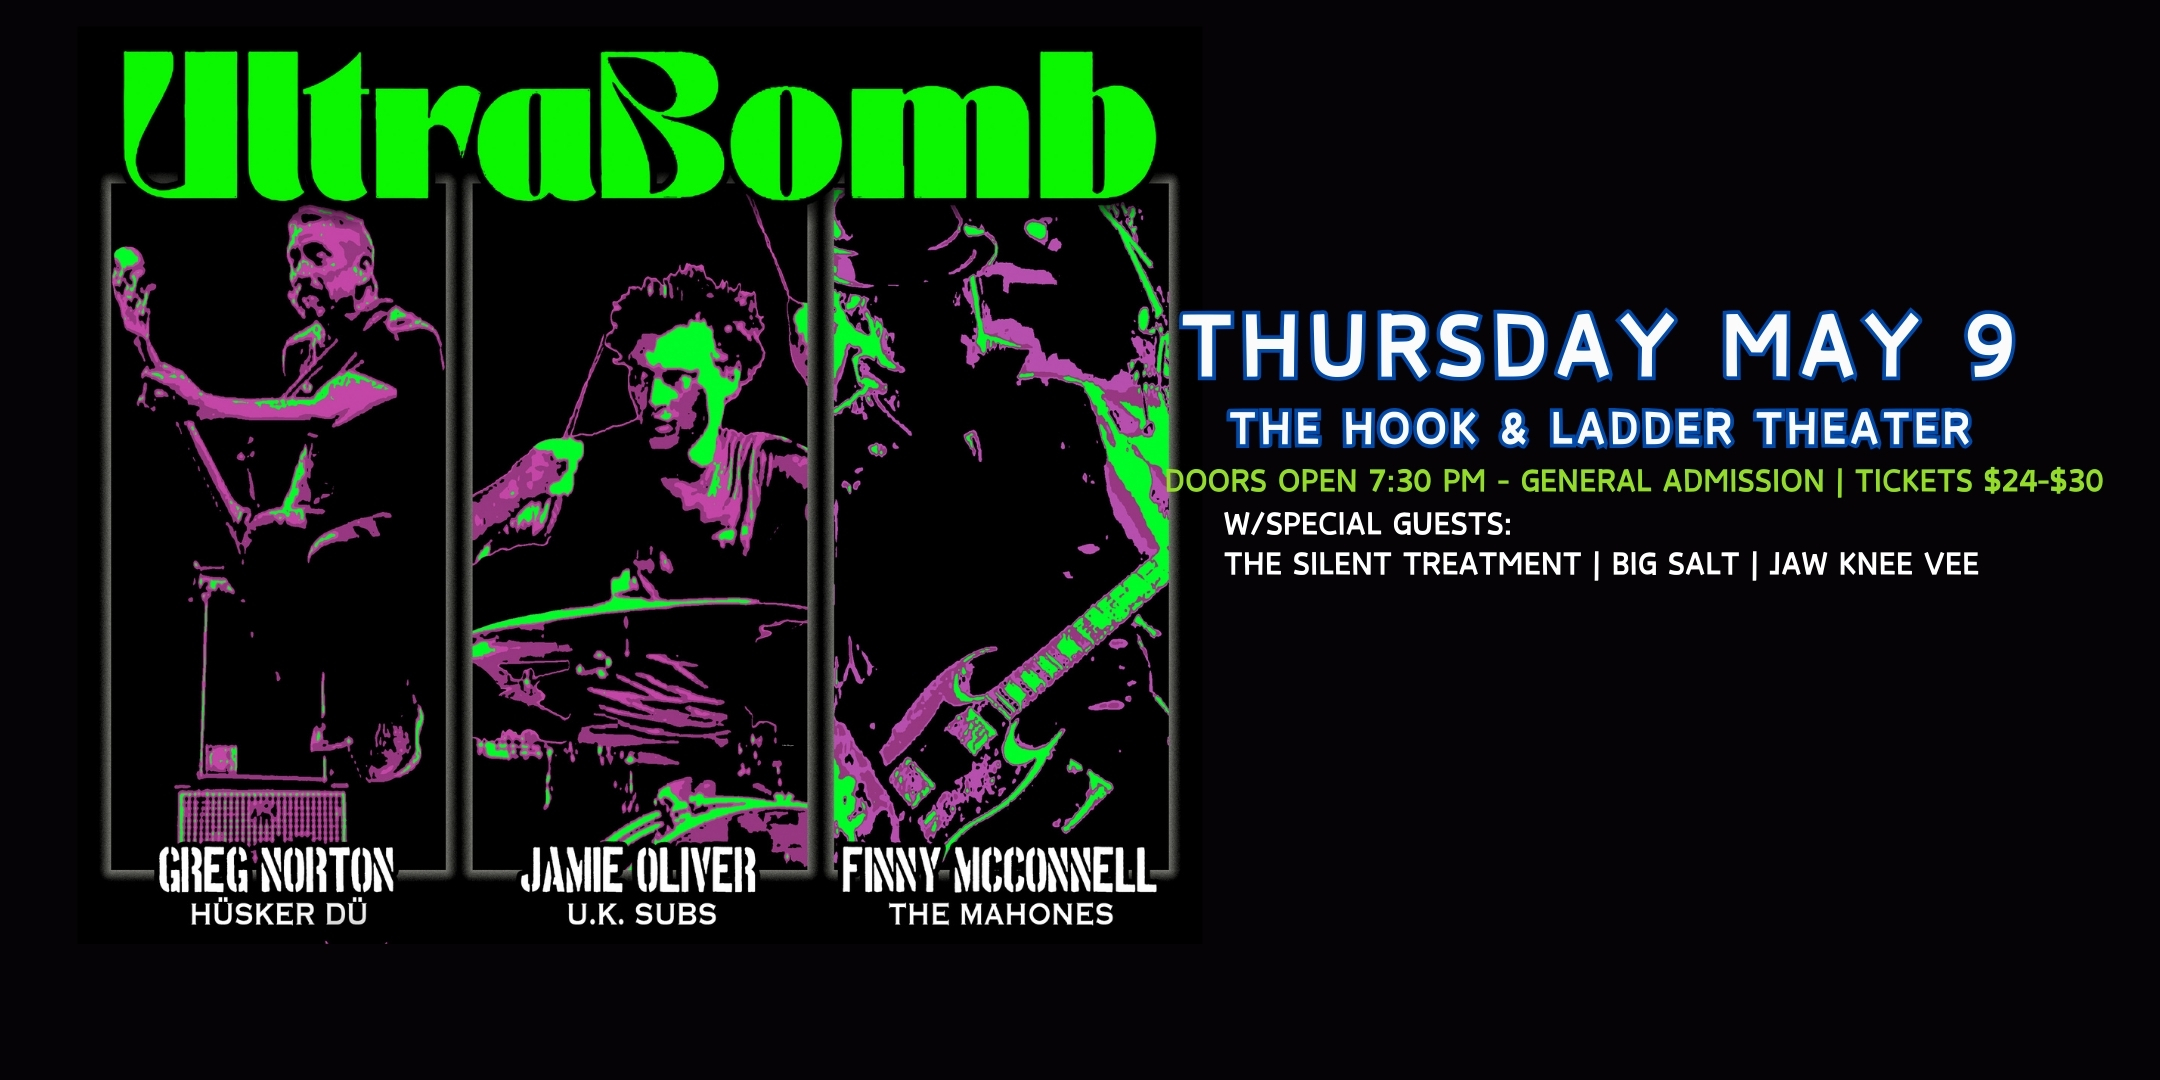 UltraBomb Greg Norton (Hüsker Dü) Finny McConnell (The Mahones) Jamie Oliver (UK Subs) with special guests The Silent Treatment | Big Salt | Jaw Knee Vee Thursday May 9 The Hook and Ladder Theater Doors 7:30pm :: Music 8:00pm :: 21+ General Admission: $24 ADV / $30 DOS